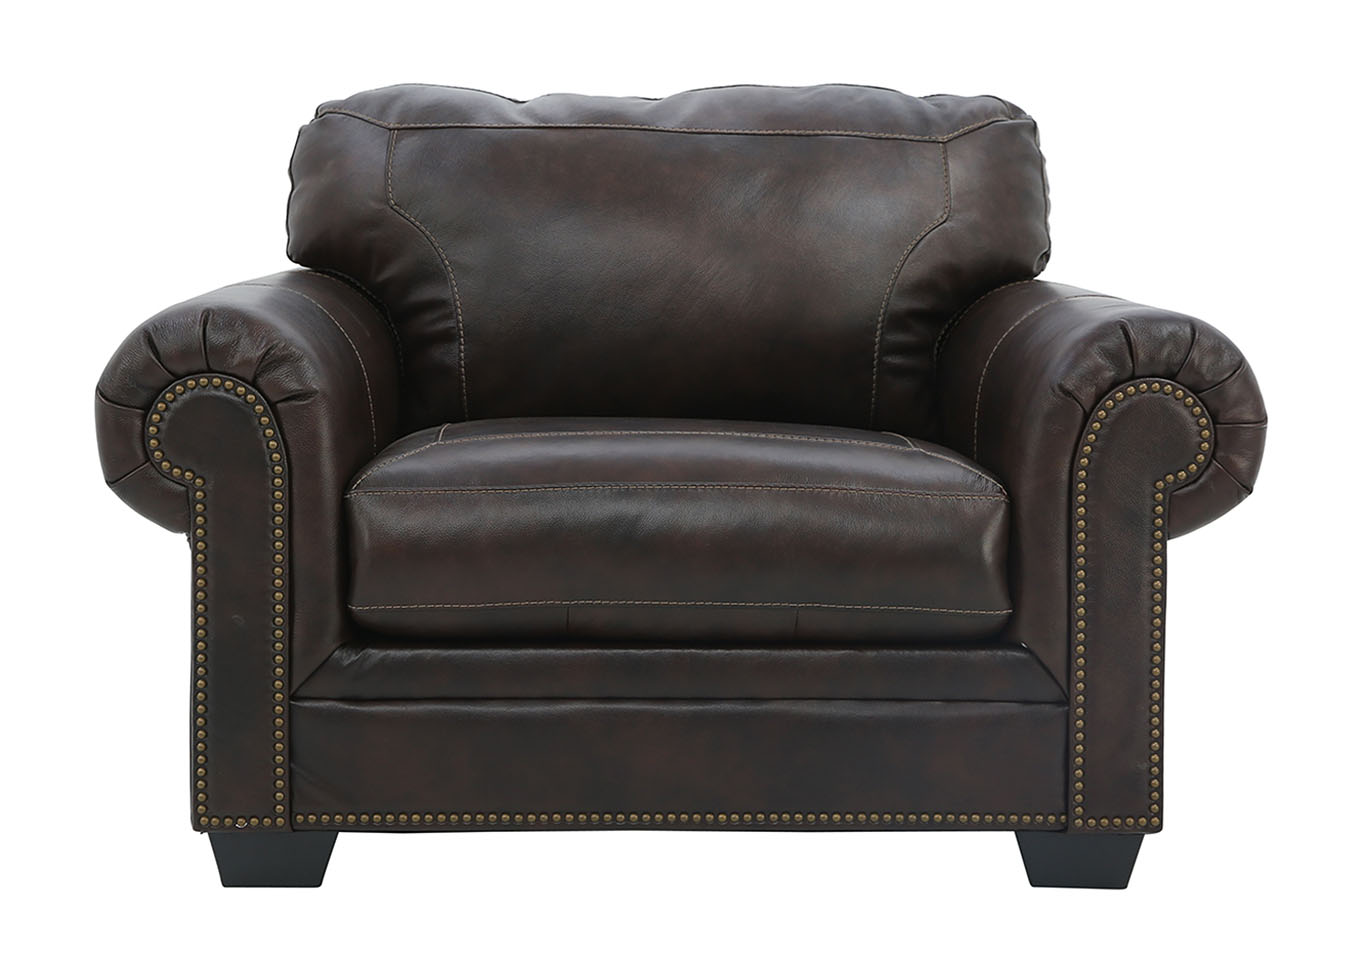 Roleson Walnut Oversize Chair Ivan, Leather Oversized Chair